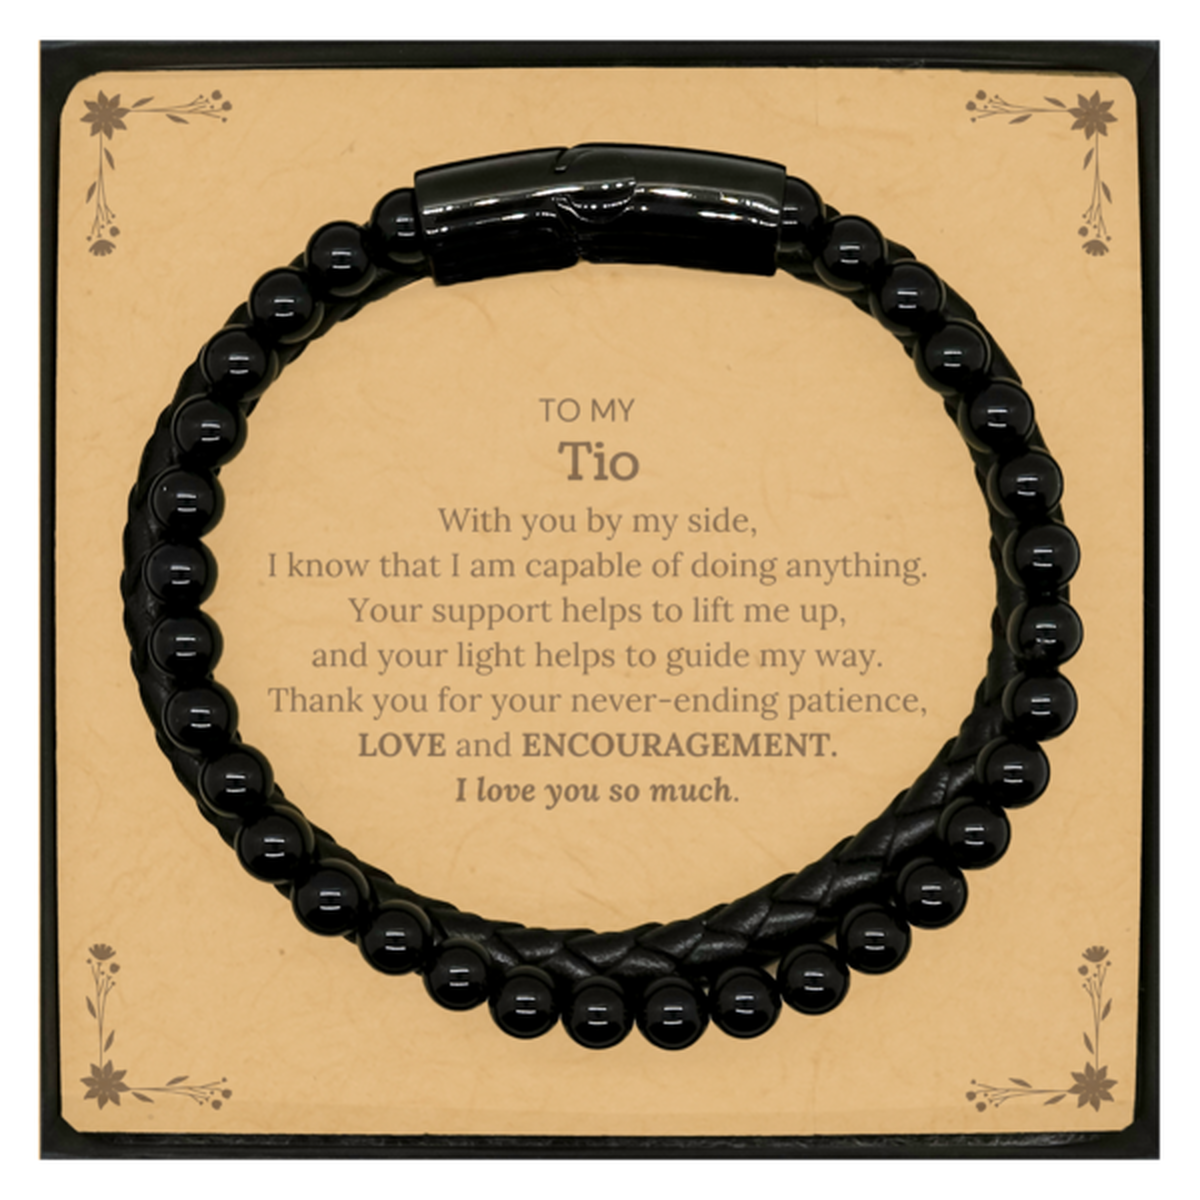 Appreciation Tio Stone Leather Bracelets Gifts, To My Tio Birthday Christmas Wedding Keepsake Gifts for Tio With you by my side, I know that I am capable of doing anything. I love you so much